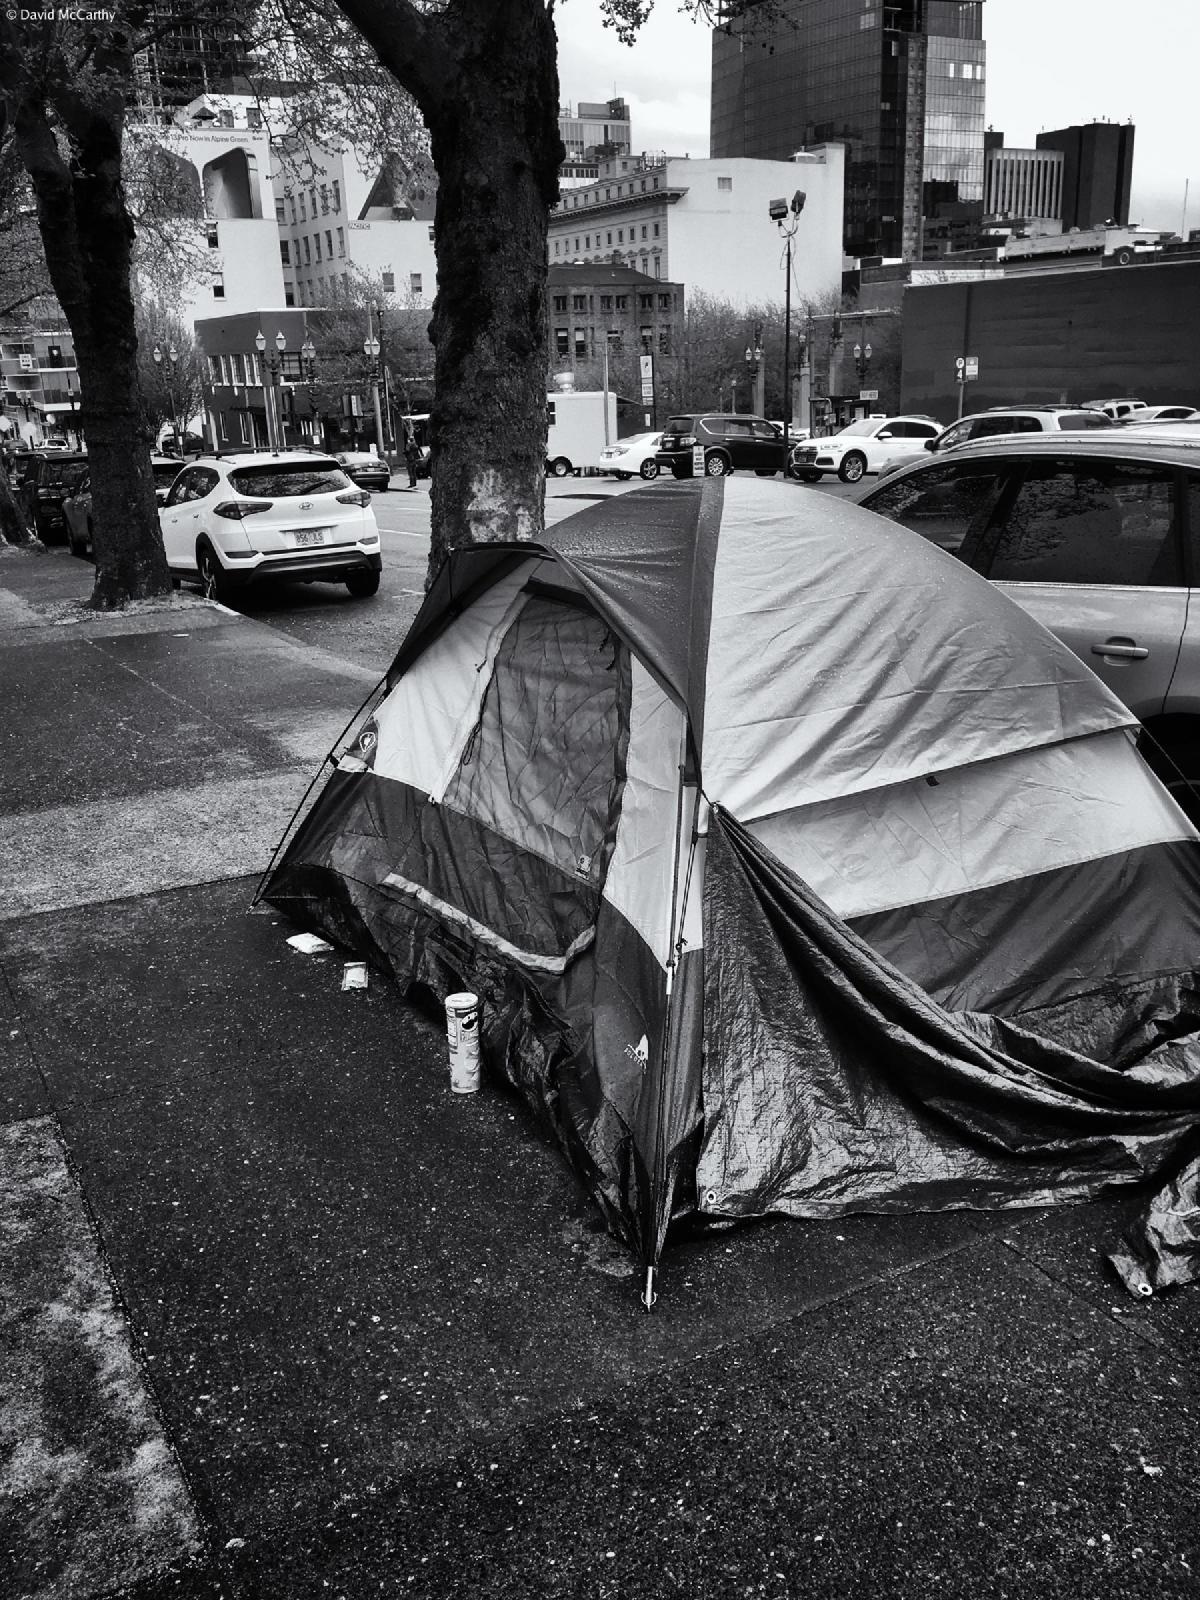 Black and white photograph of a visibly wet camping tent on a sidewalk in Portland Oregon. A can of Pringles brand potato chips sits near the entrance of the tent.